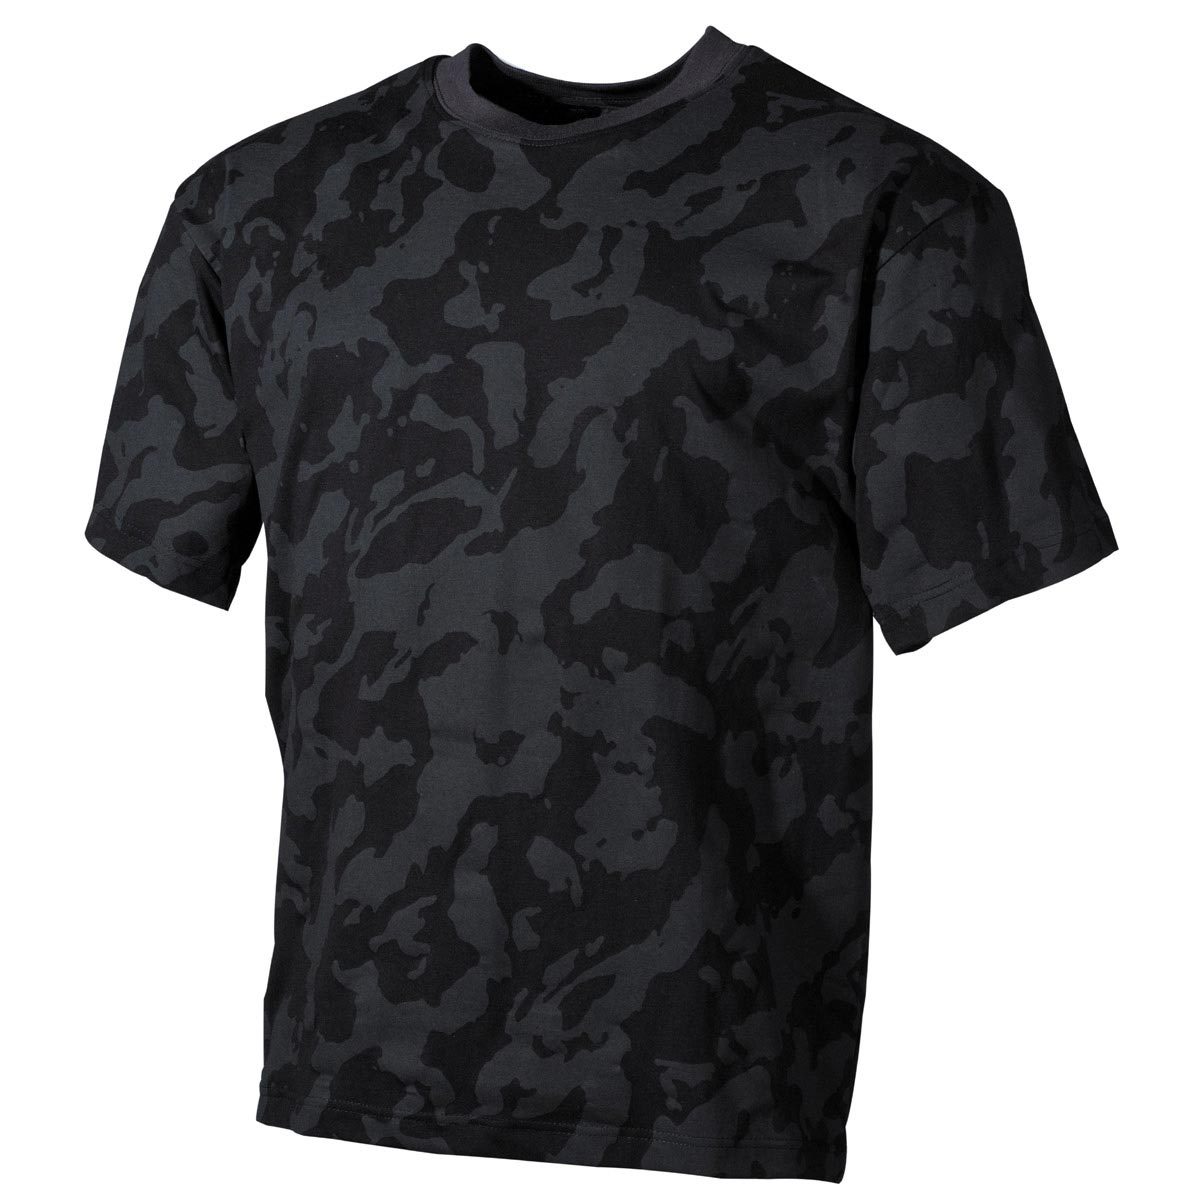 Mens Army Camouflage T-Shirt 100% Cotton Crew Neck S-3XL Military ...